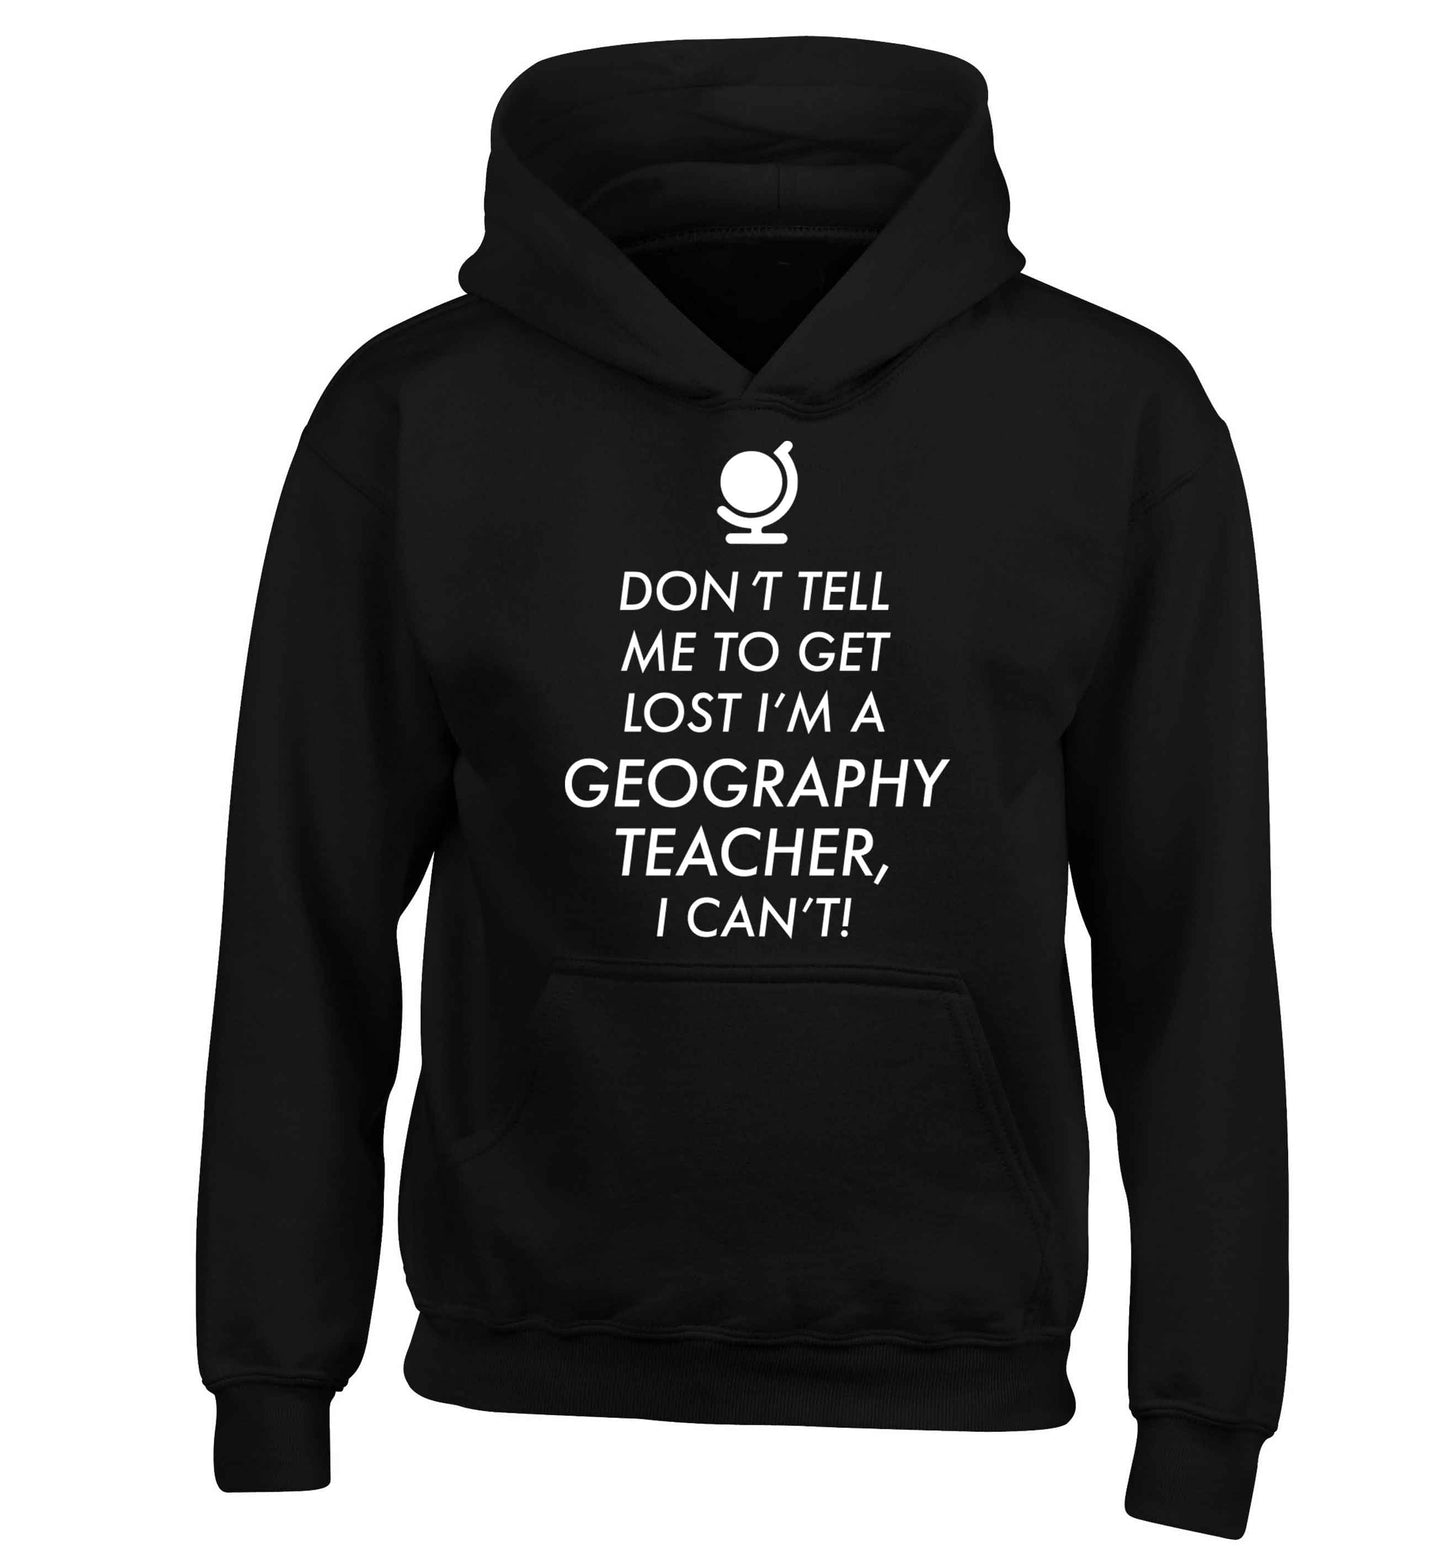 Don't tell me to get lost I'm a geography teacher, I can't children's black hoodie 12-13 Years